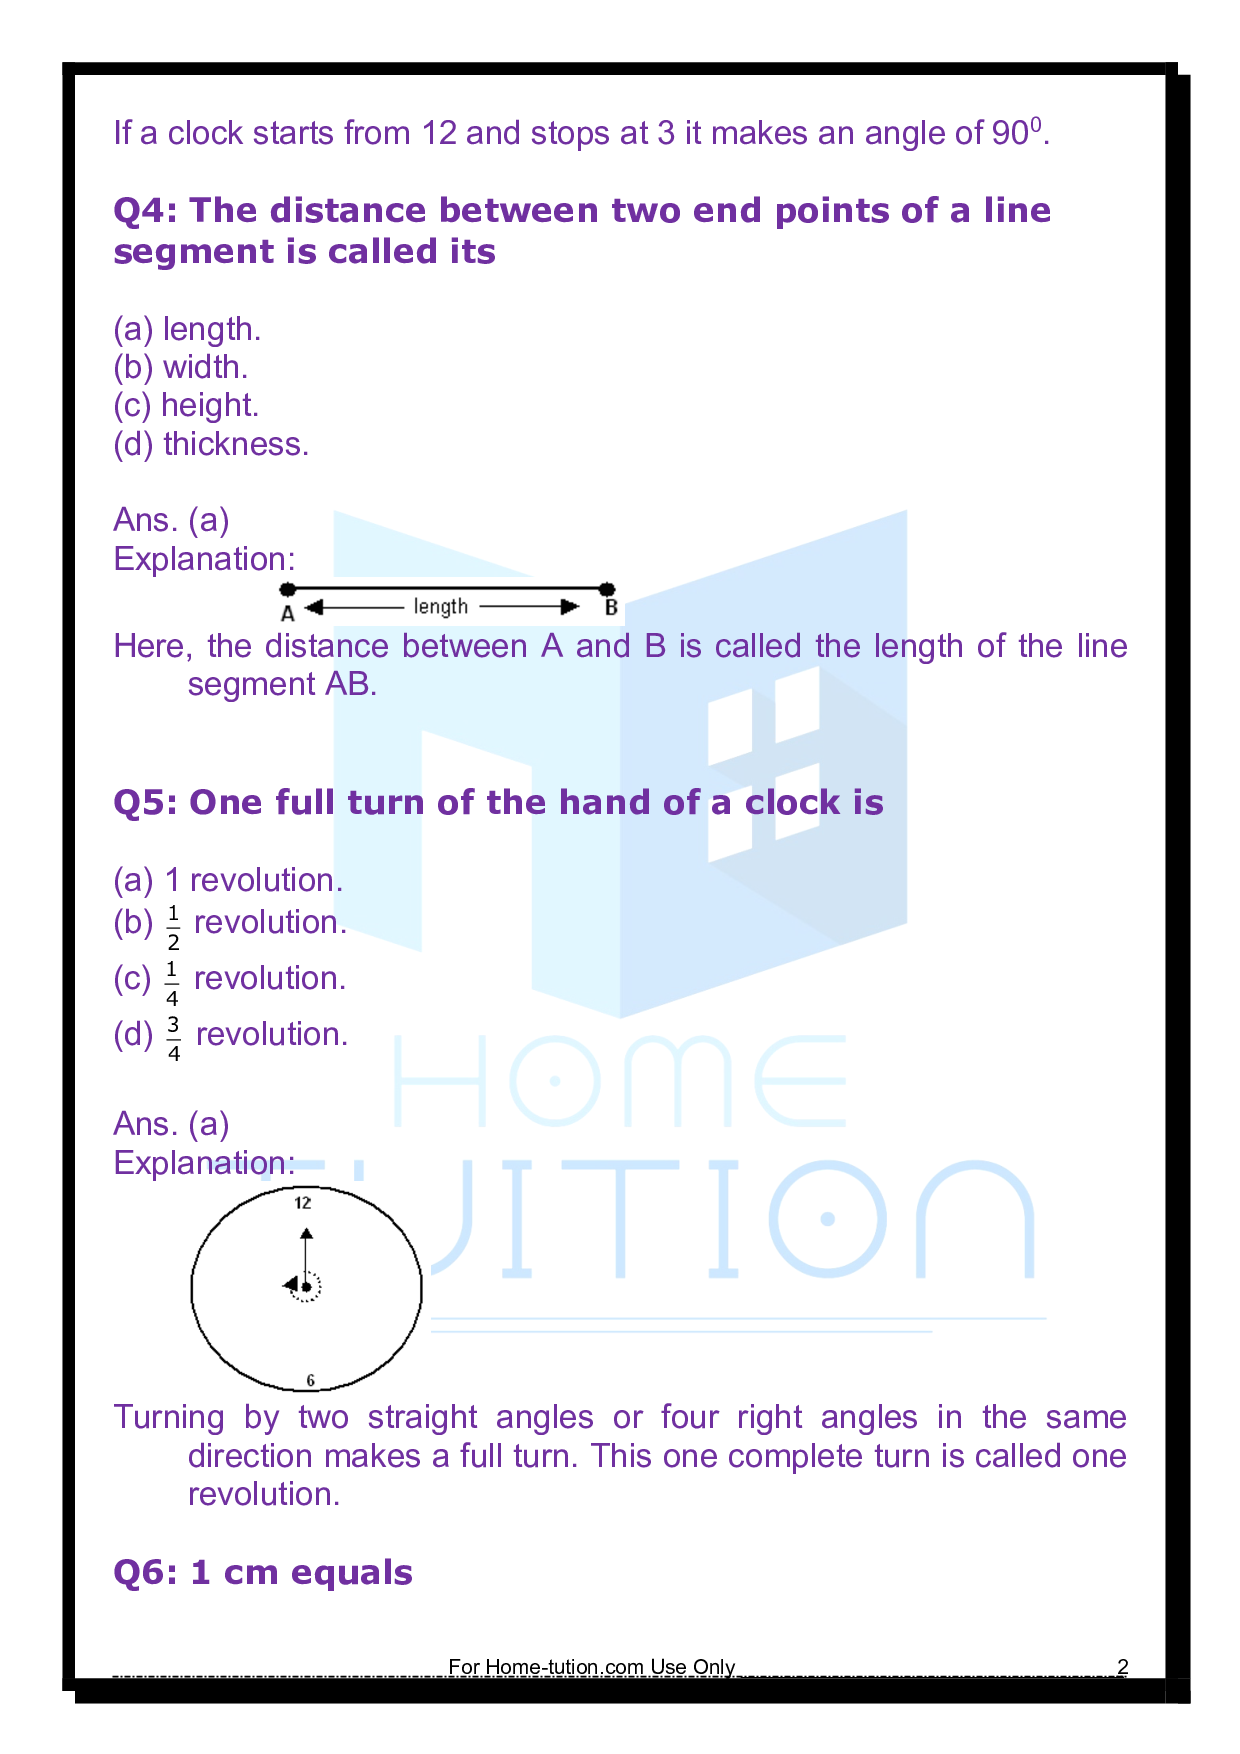 Questions for Chapter 5 Understanding Elementary Shapes